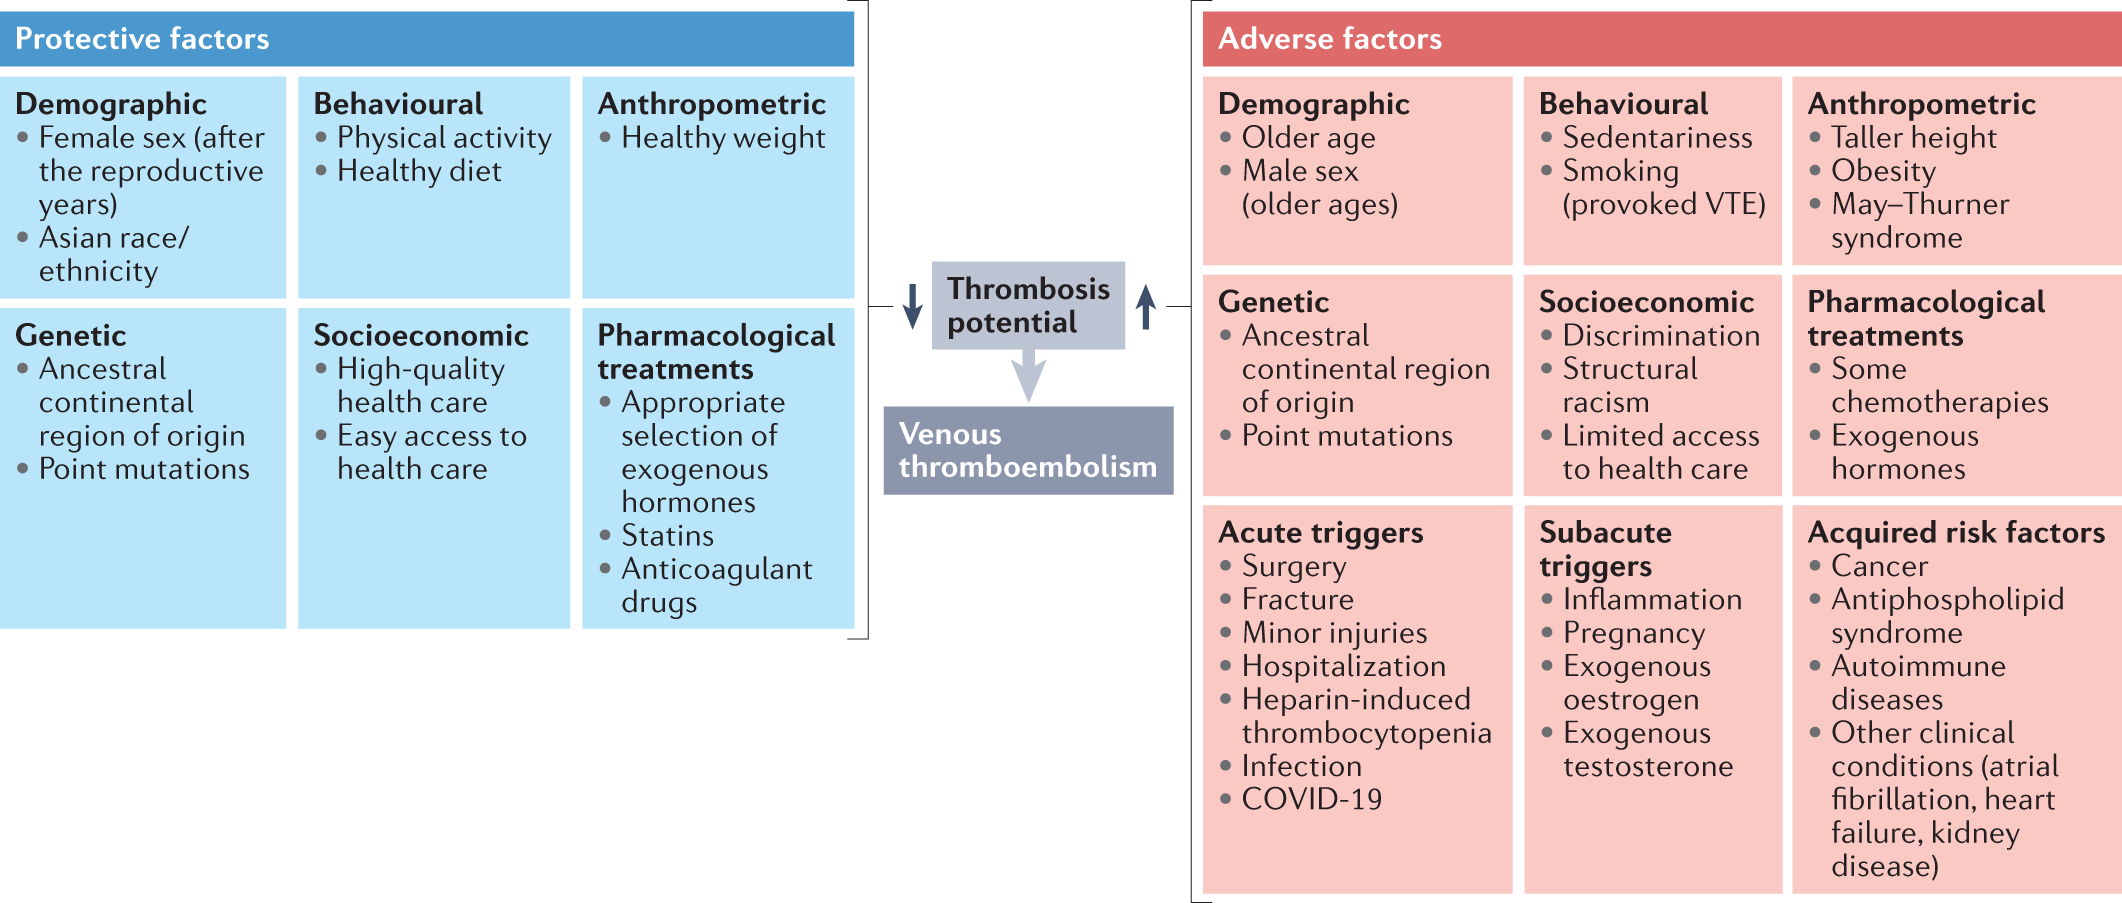 Epidemiology and prevention of venous thromboembolism Nature Reviews Cardiology image